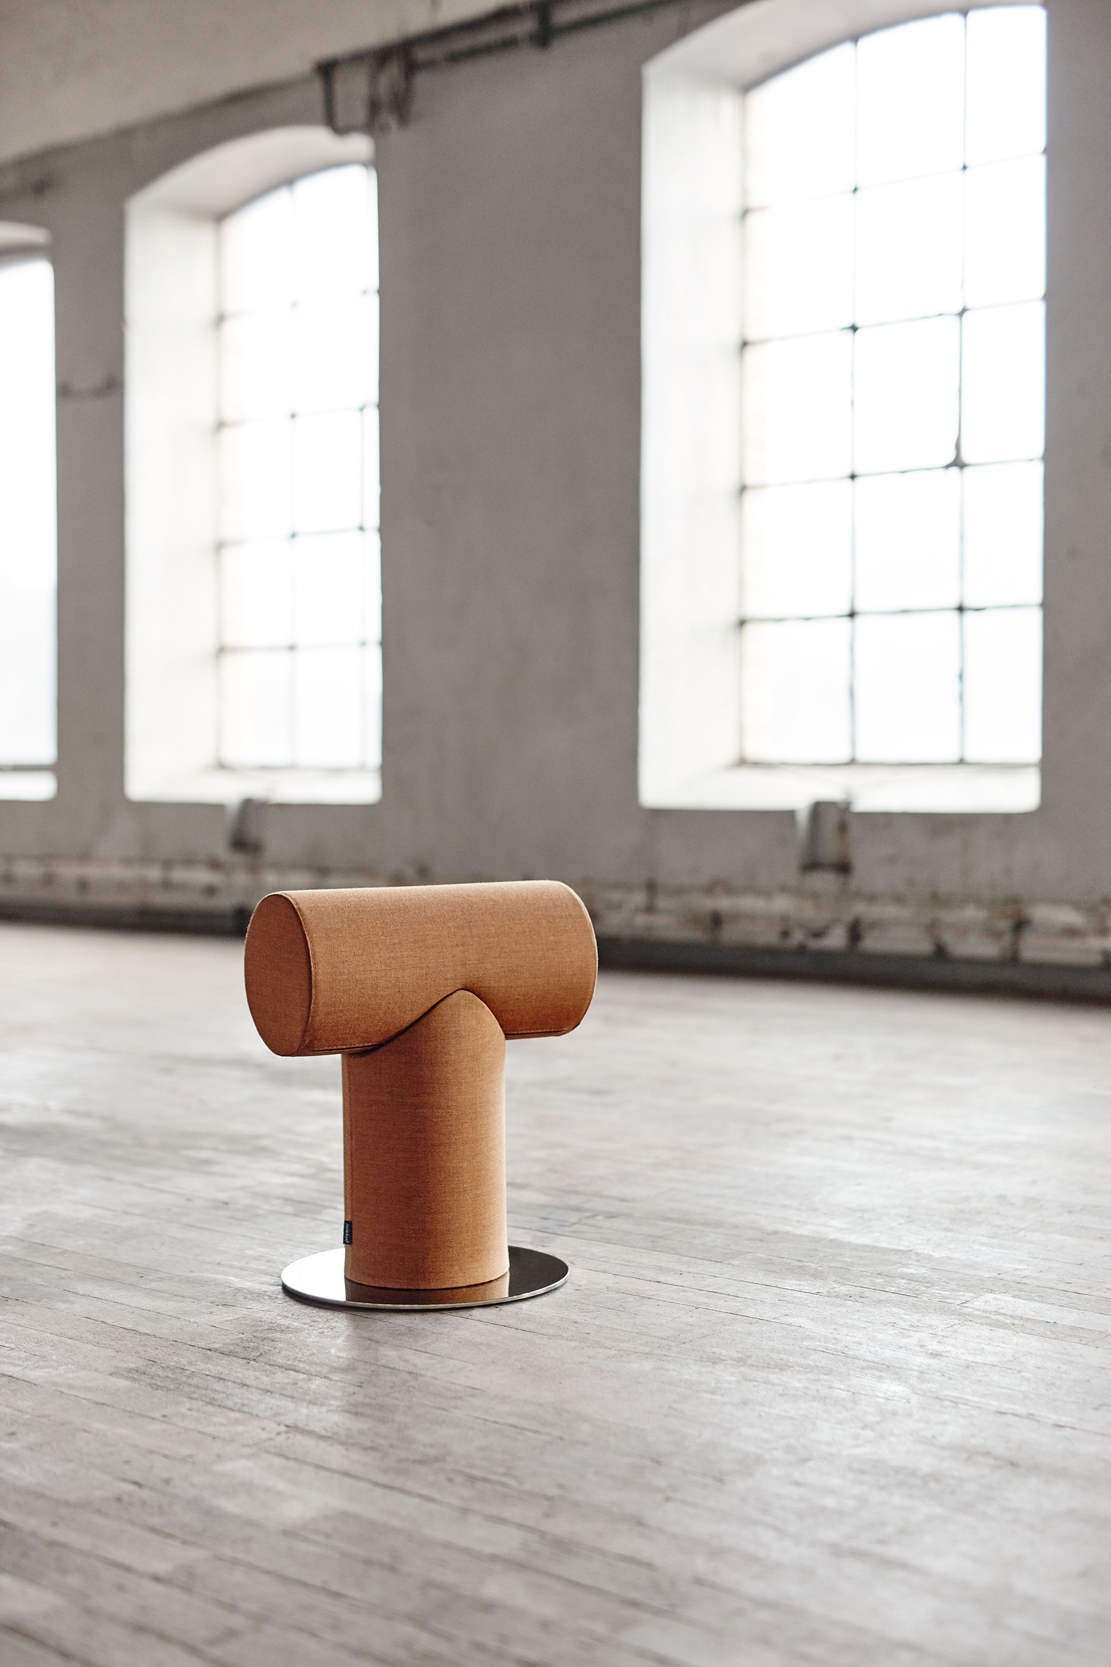 You are currently viewing MR T STOOL IN PRODUCTION BY MATERIA